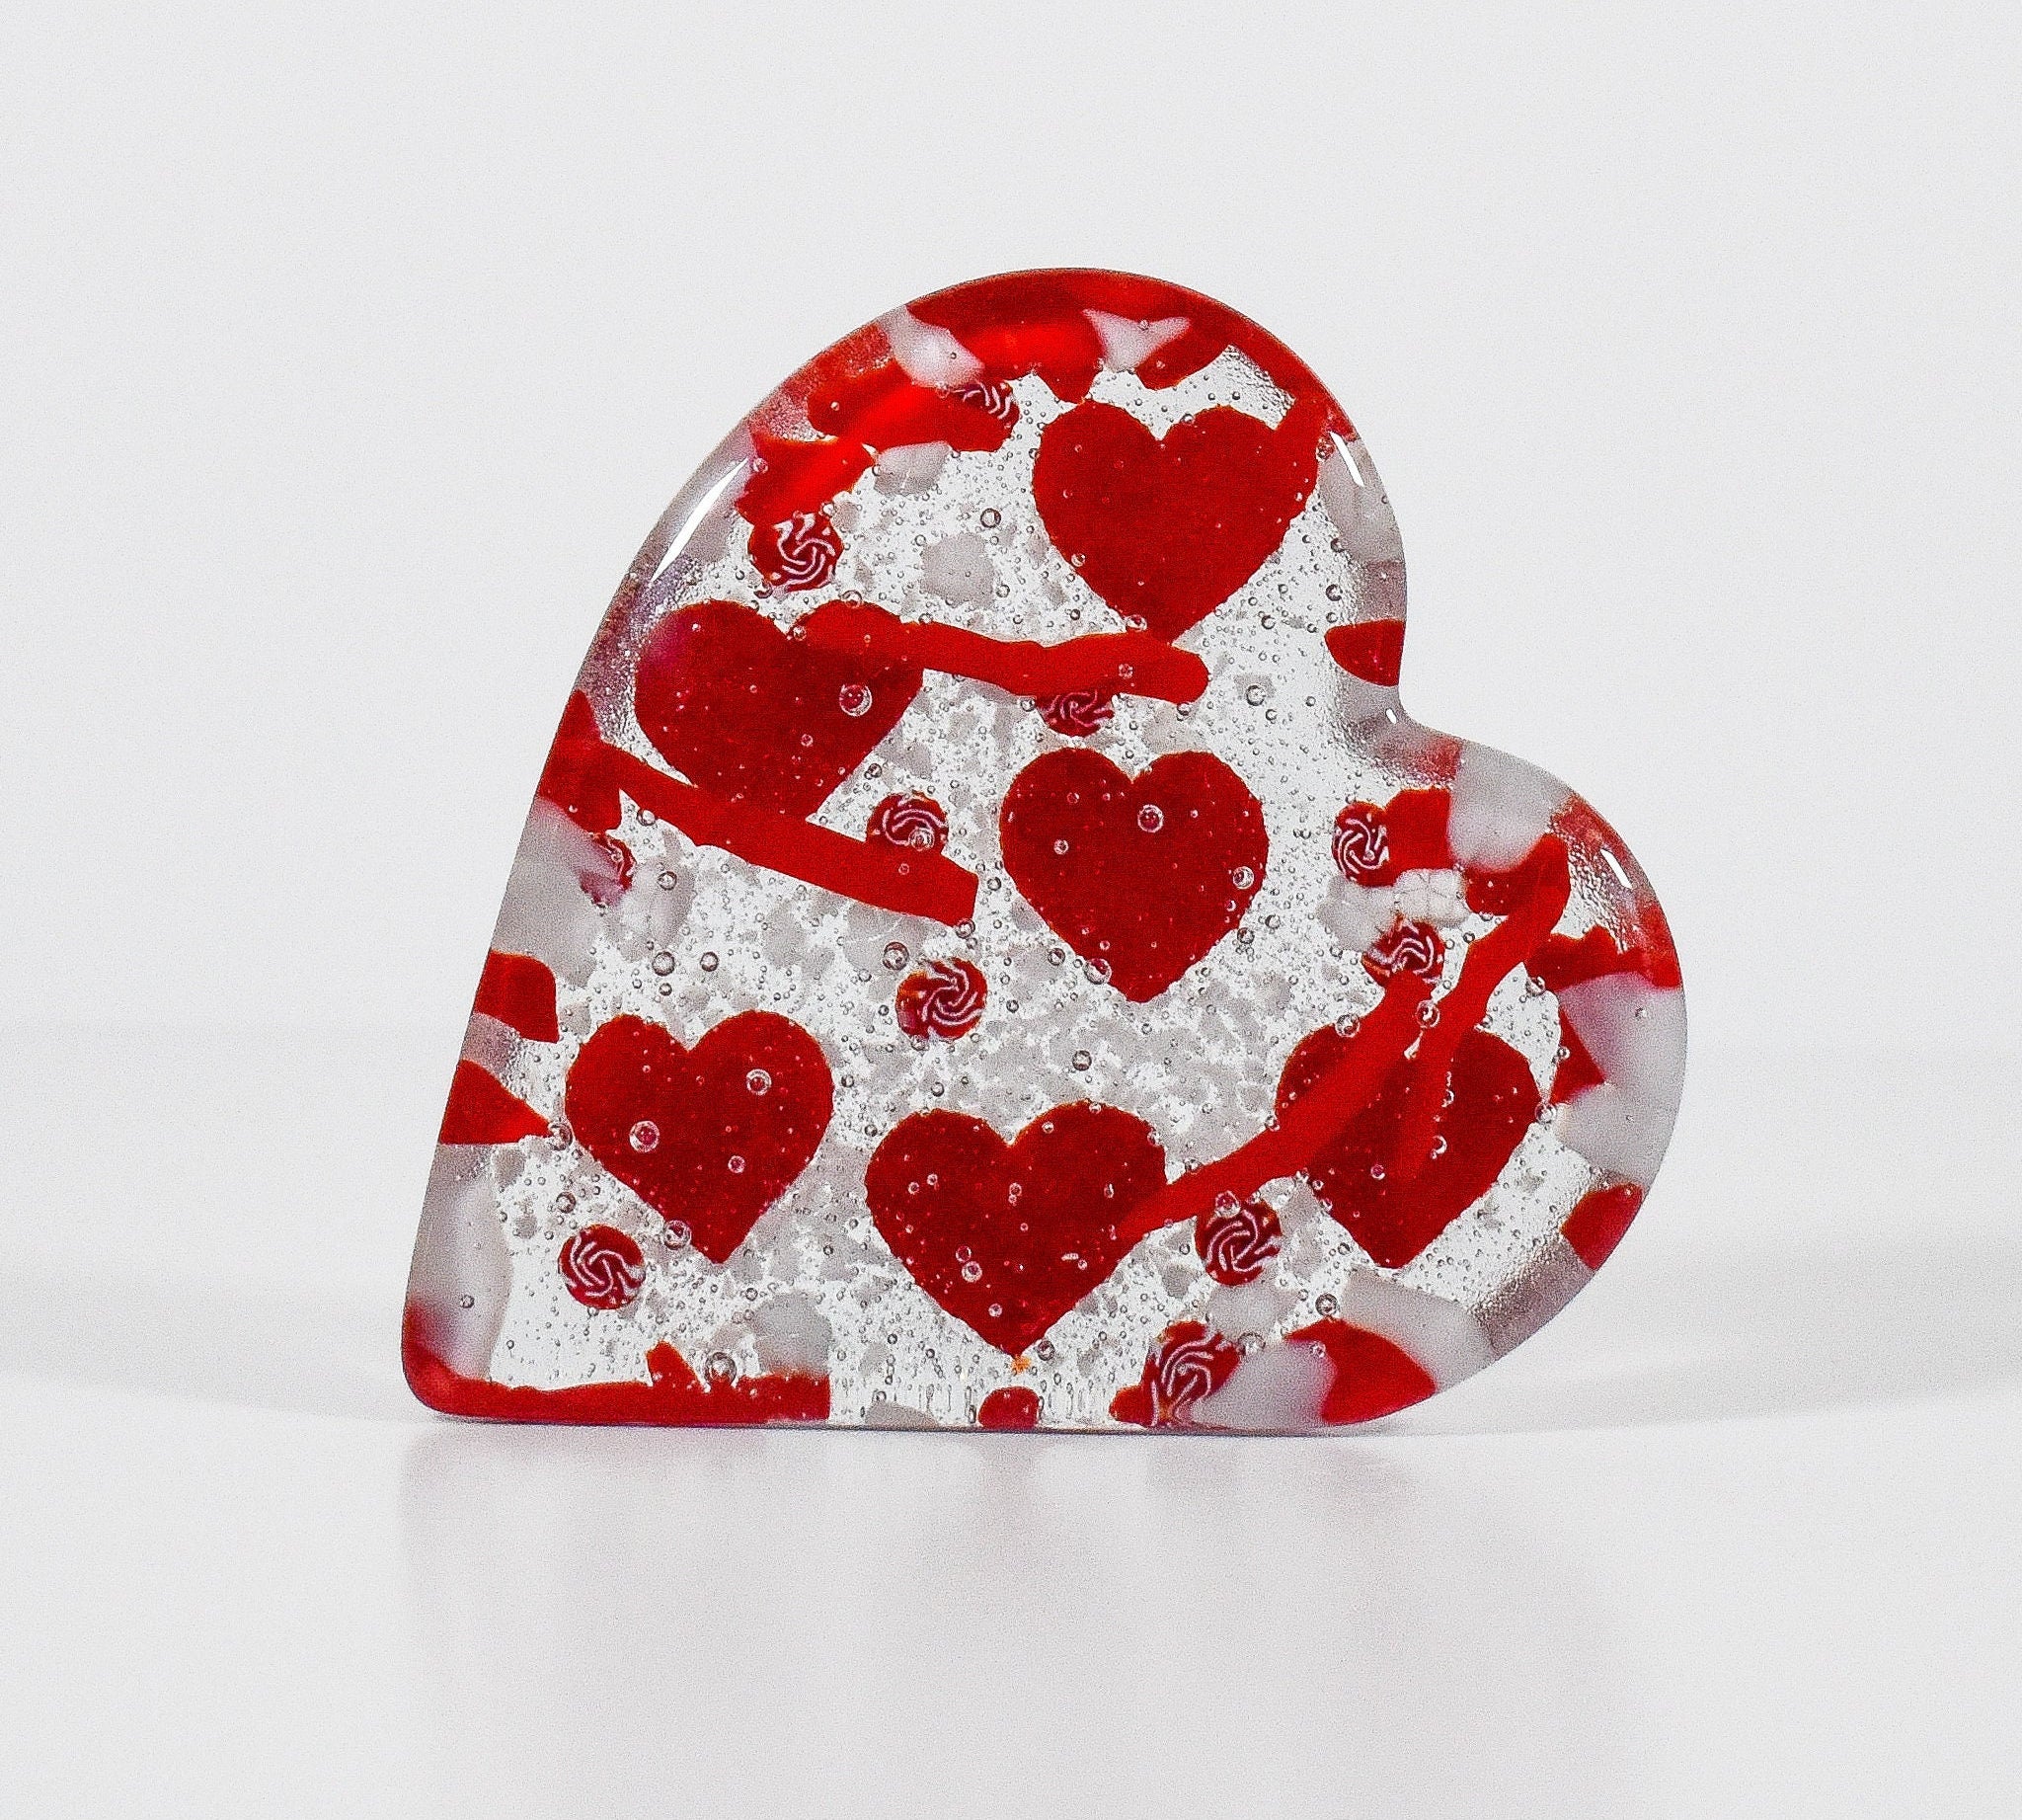 Heart-shaped glass paperweight standing on edge. Paperweight has six red hearts fused into the glass.